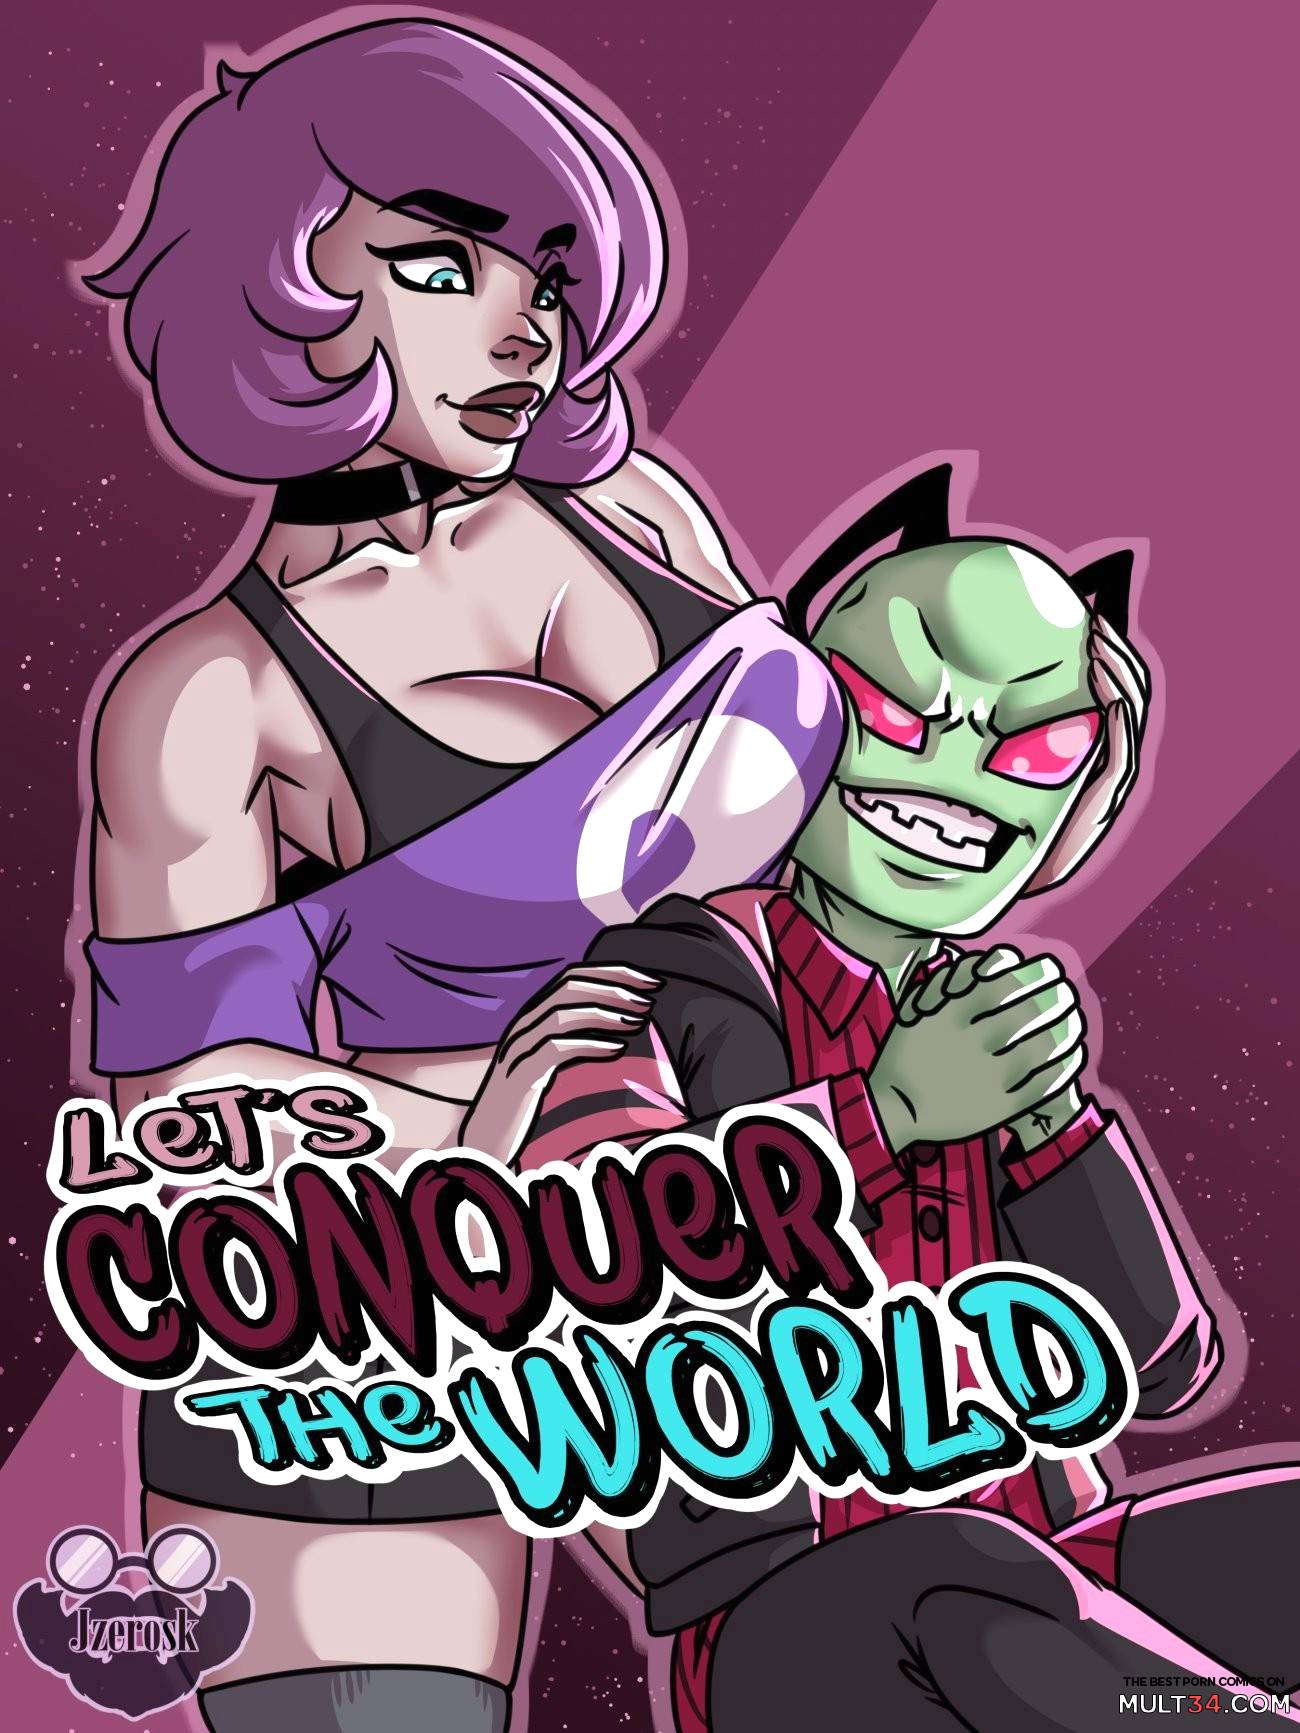 Let's Conquer the World page 1